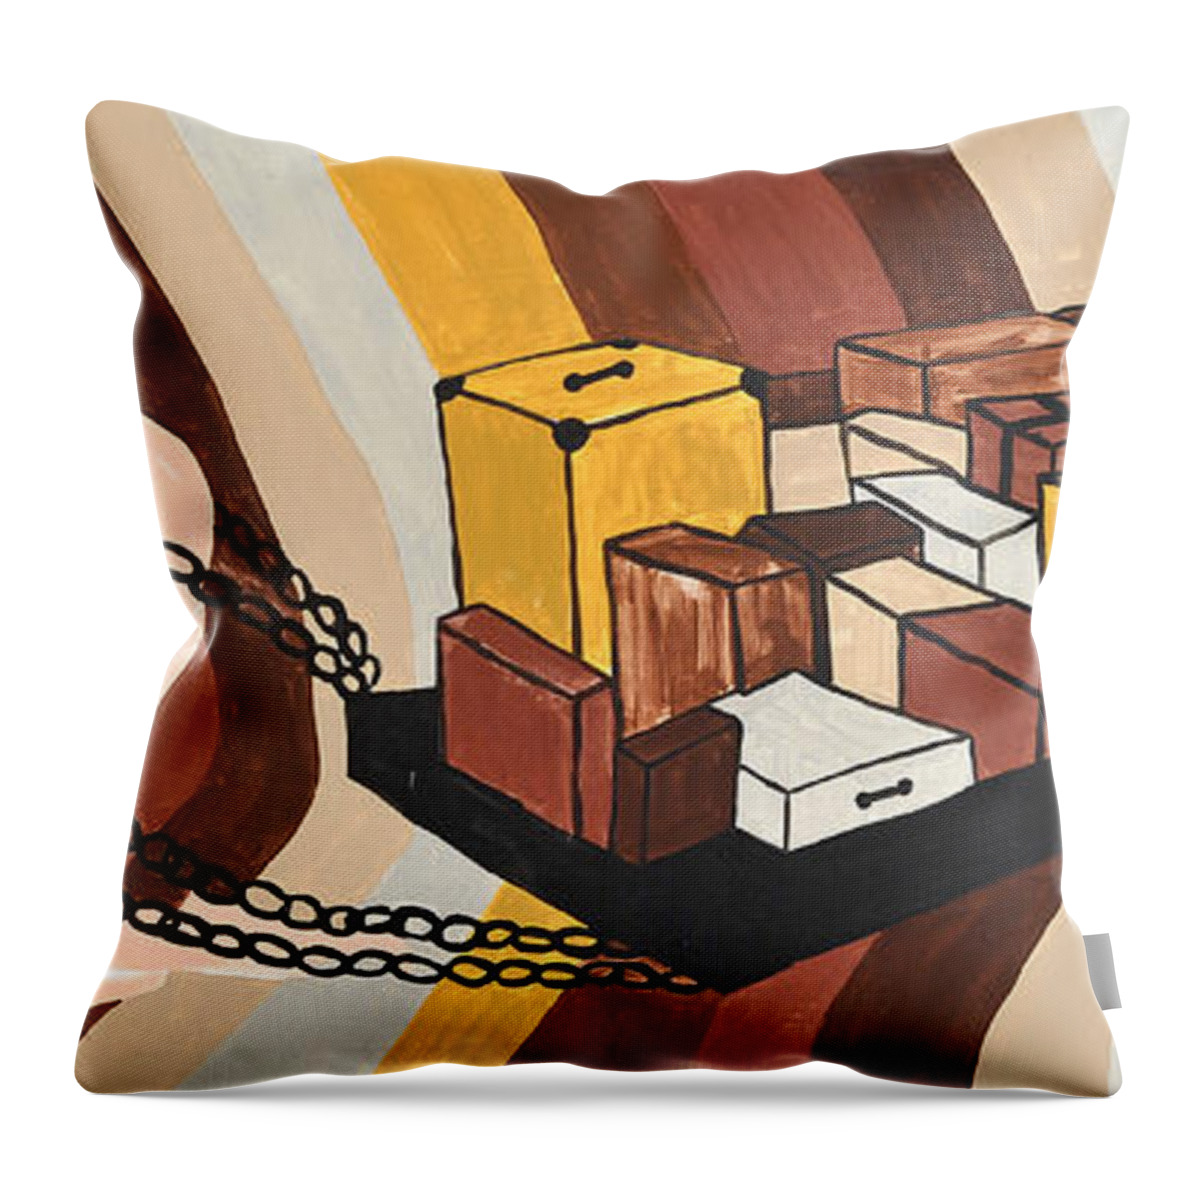 Male Nude Throw Pillow featuring the painting Baggage by Erika Jean Chamberlin